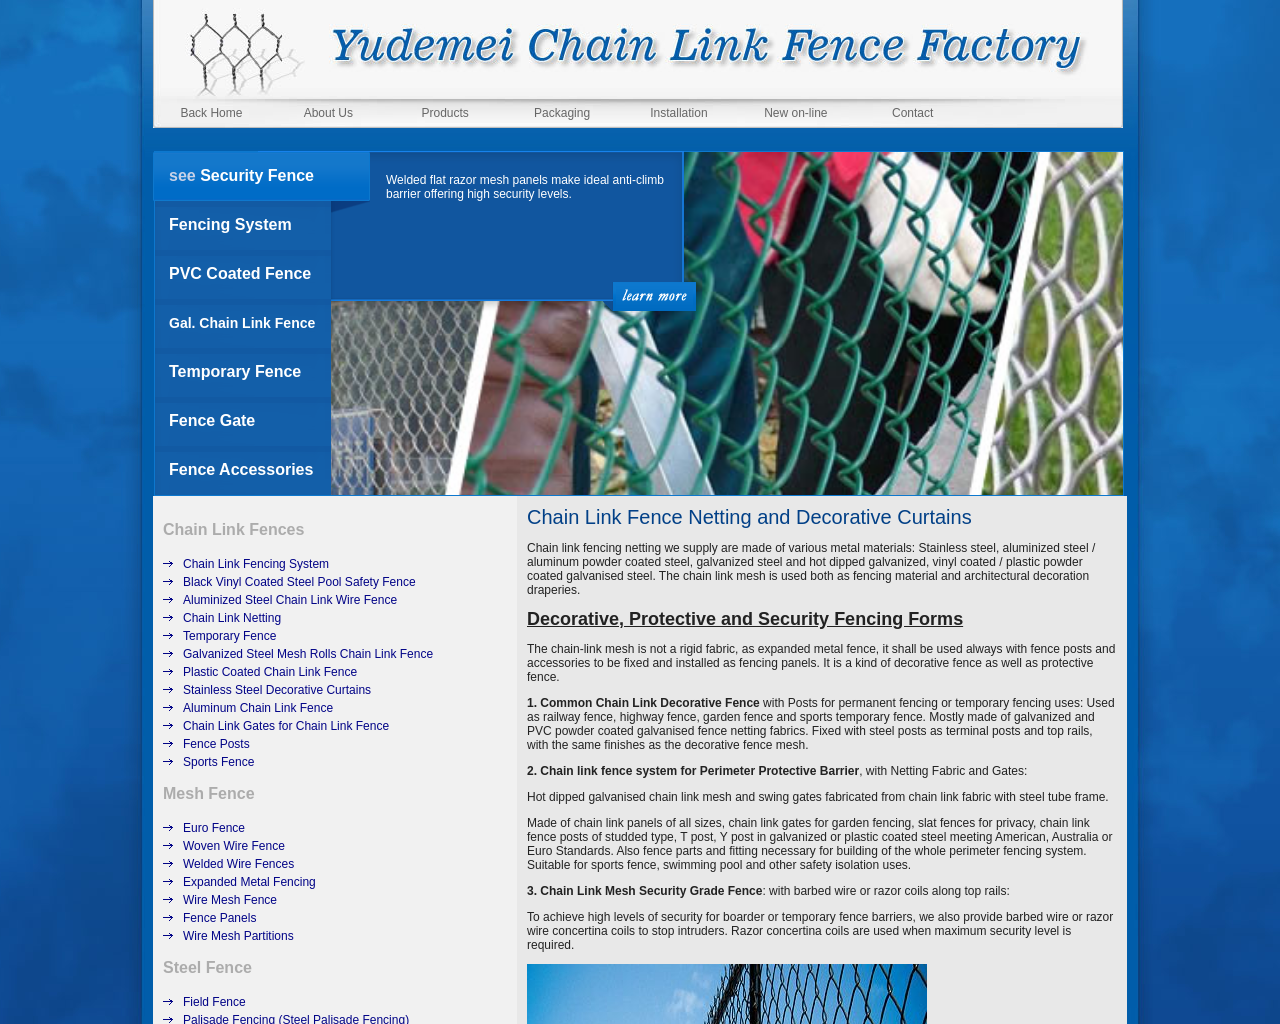 chainlinkfence.org